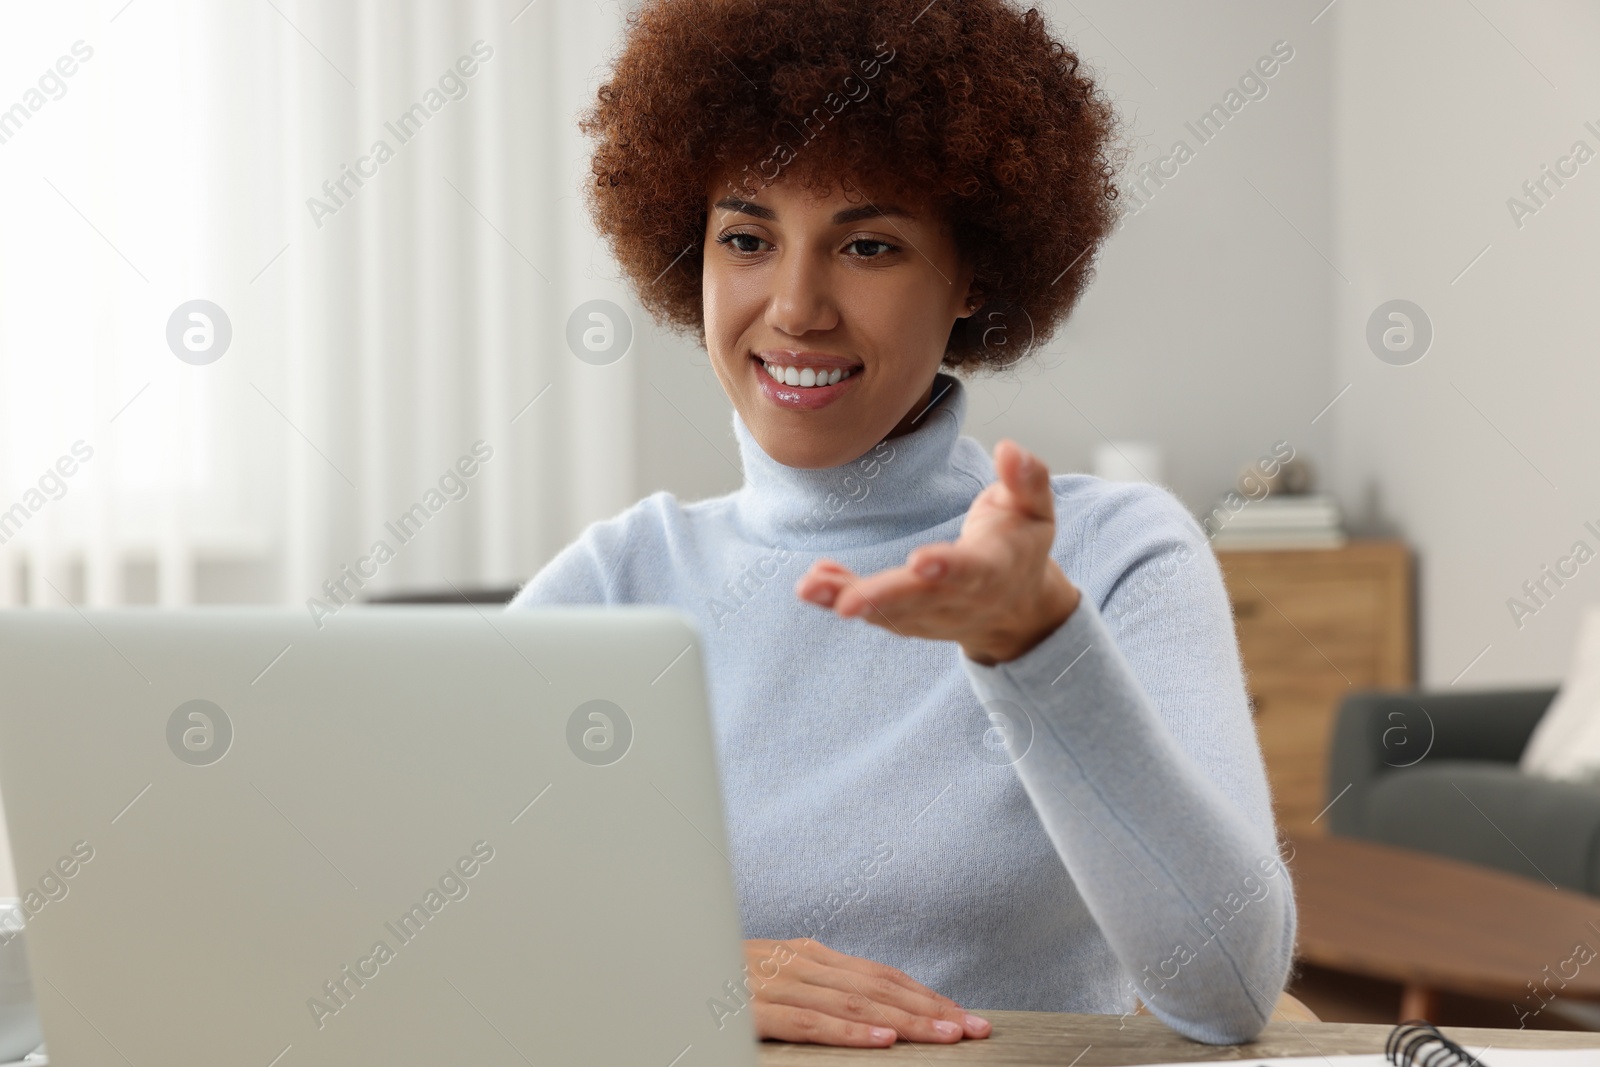 Photo of Beautiful young woman having video chat via laptop at wooden desk in room